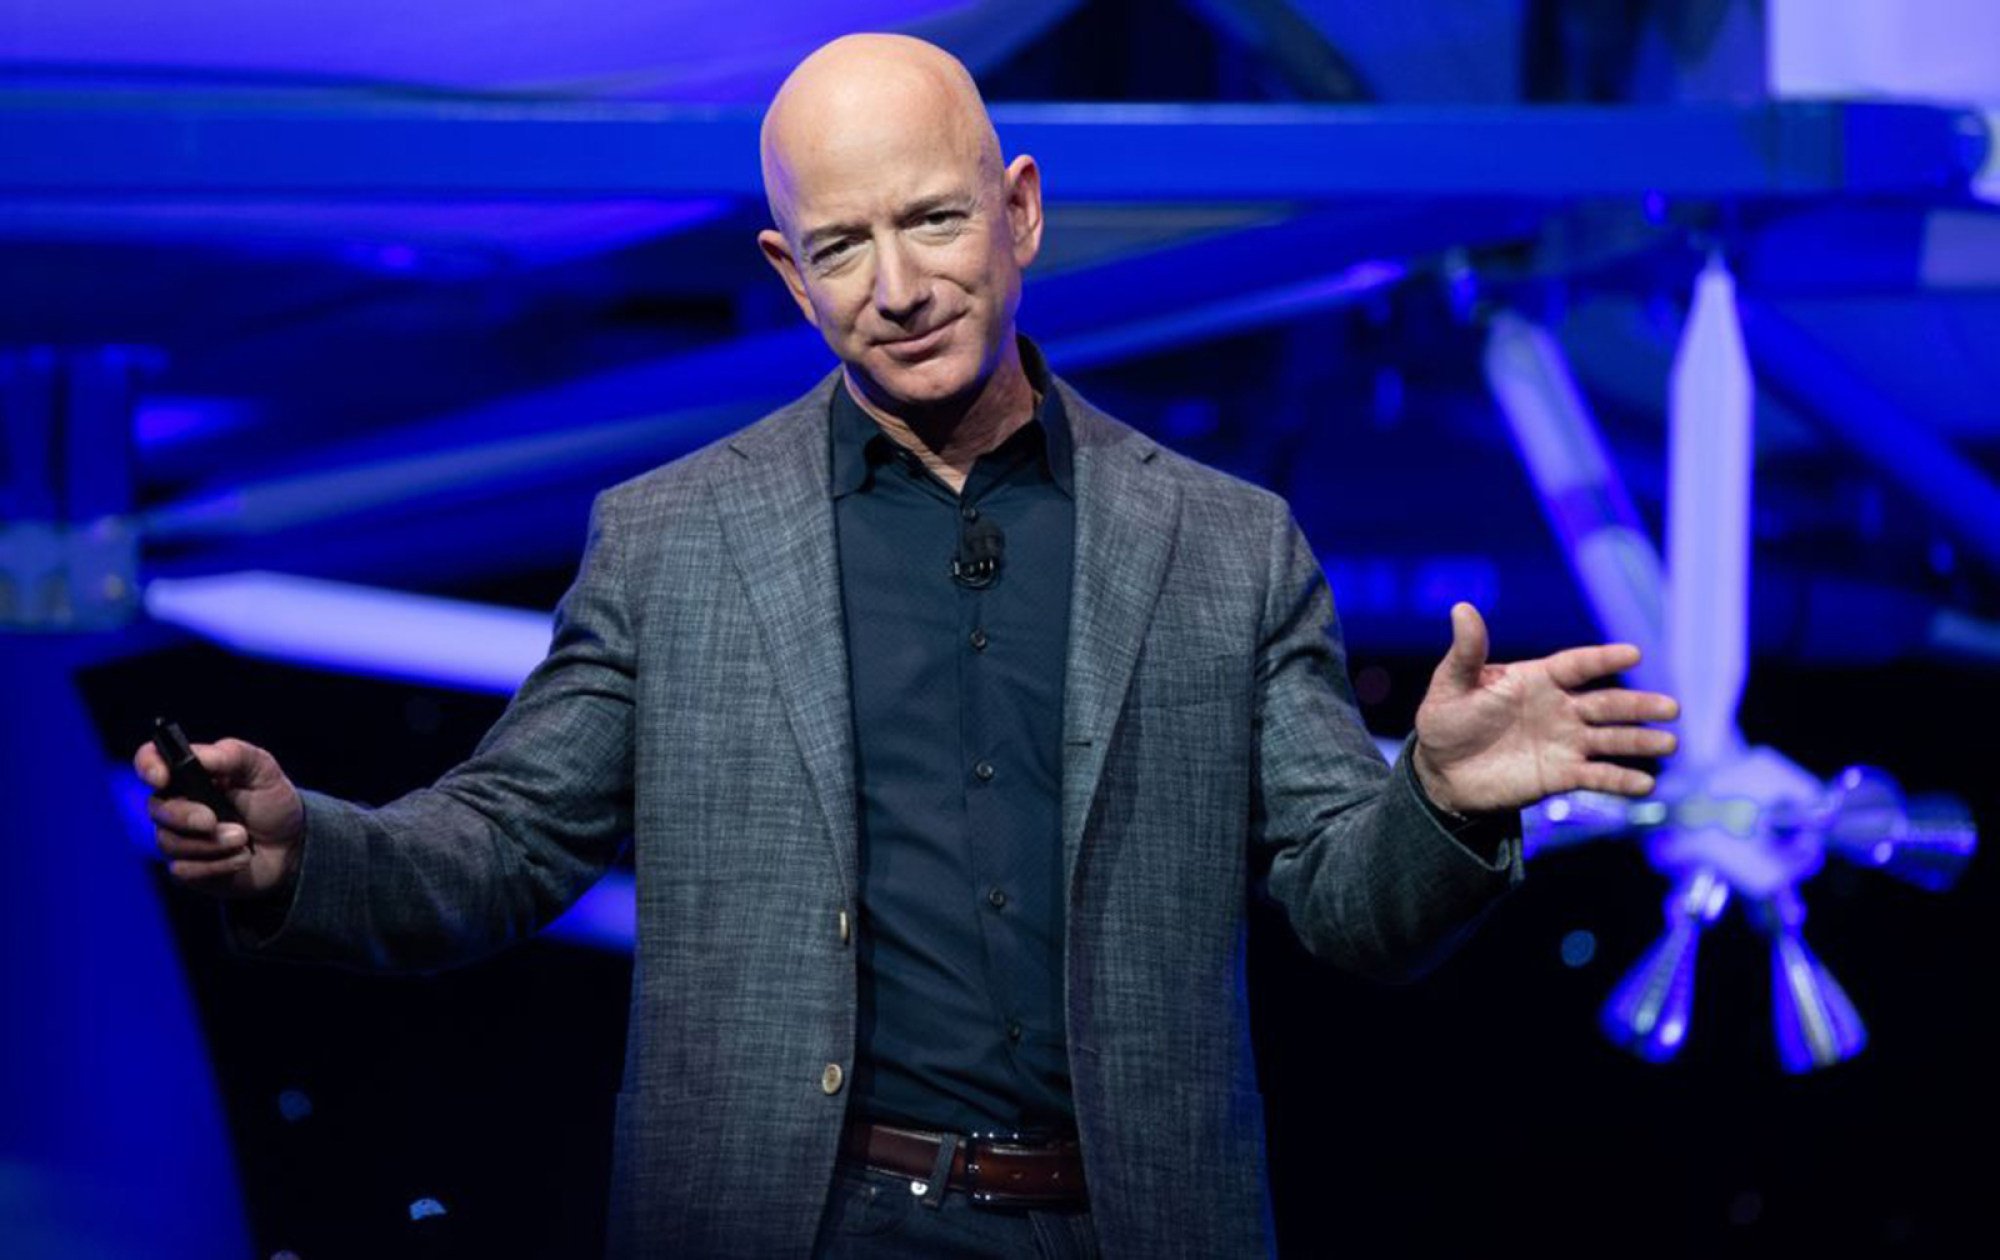 Jeff Bezos is currently the fourth richest person in the world, dropping down the list as Amazon’s value also drops. Photo: AFP via Getty Images/TNS